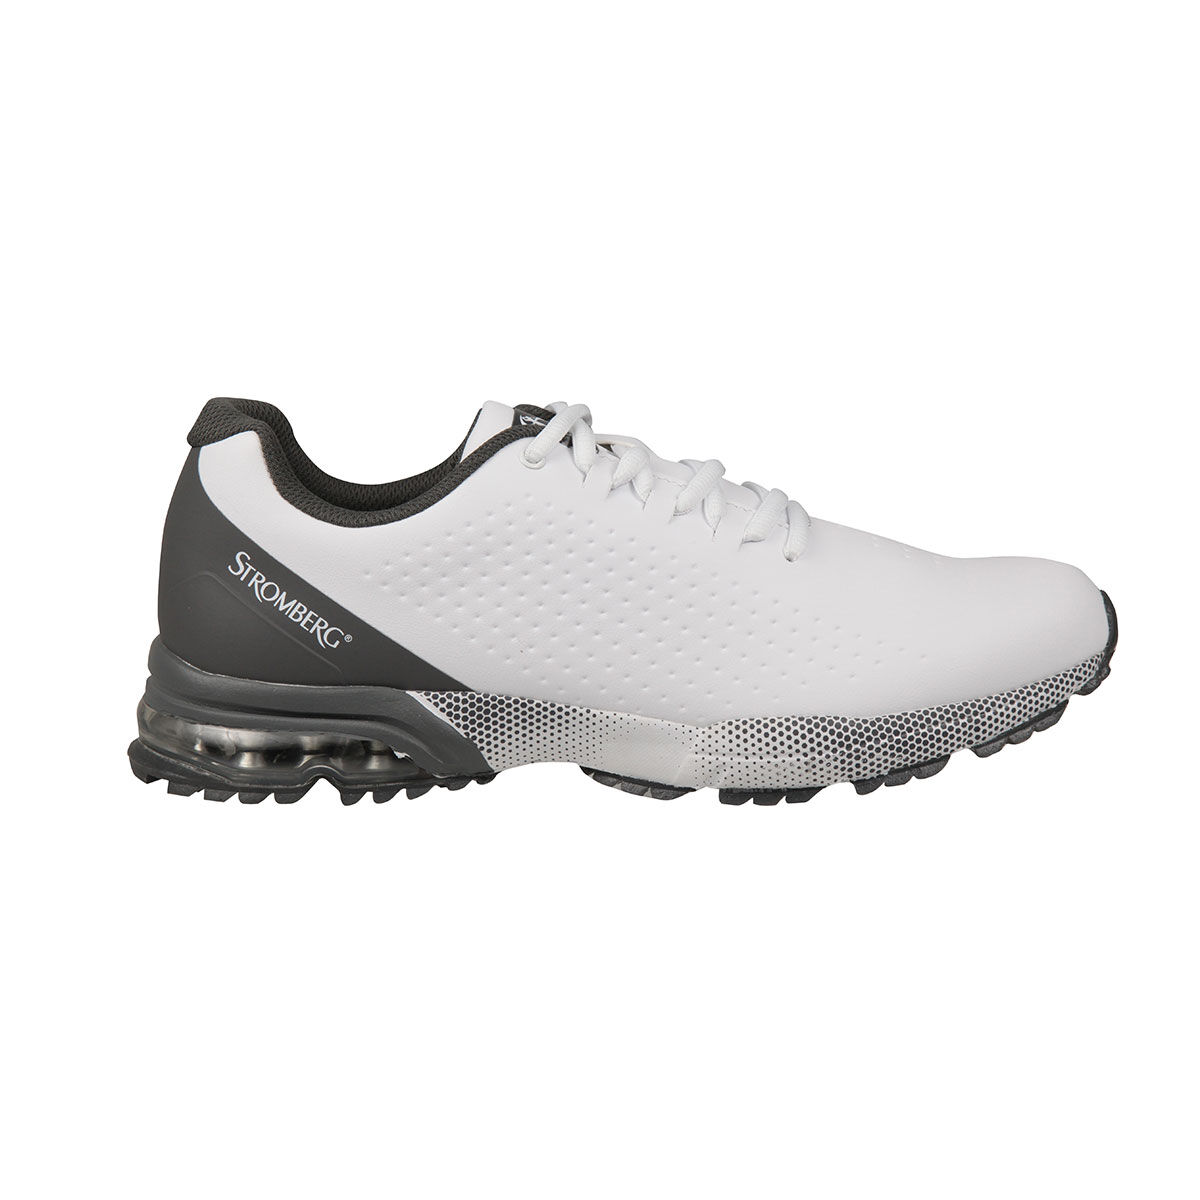 Stromberg Mens White and Grey Waterproof Ailsa Spikeless Golf Shoes, Size: 8 | American Golf - Father's Day Gift von Stromberg